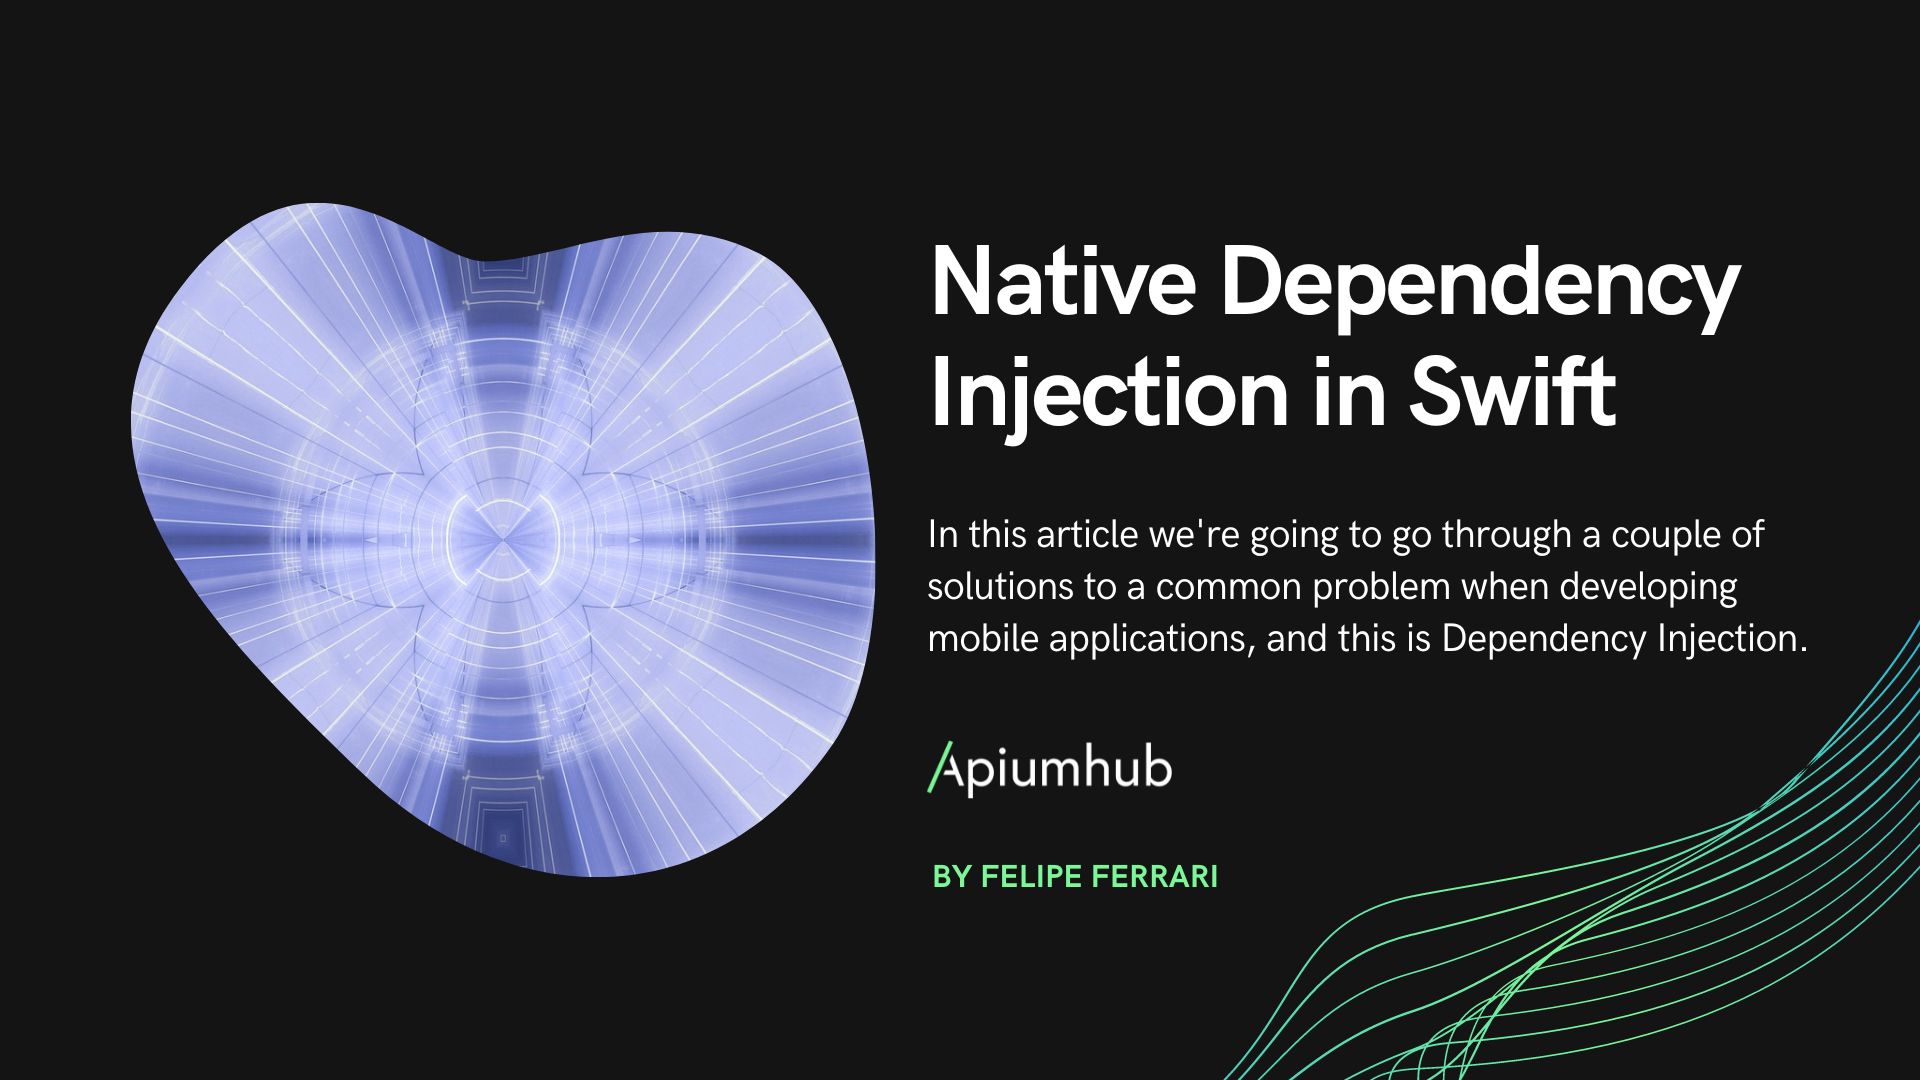 Native Dependency Injection in Swift